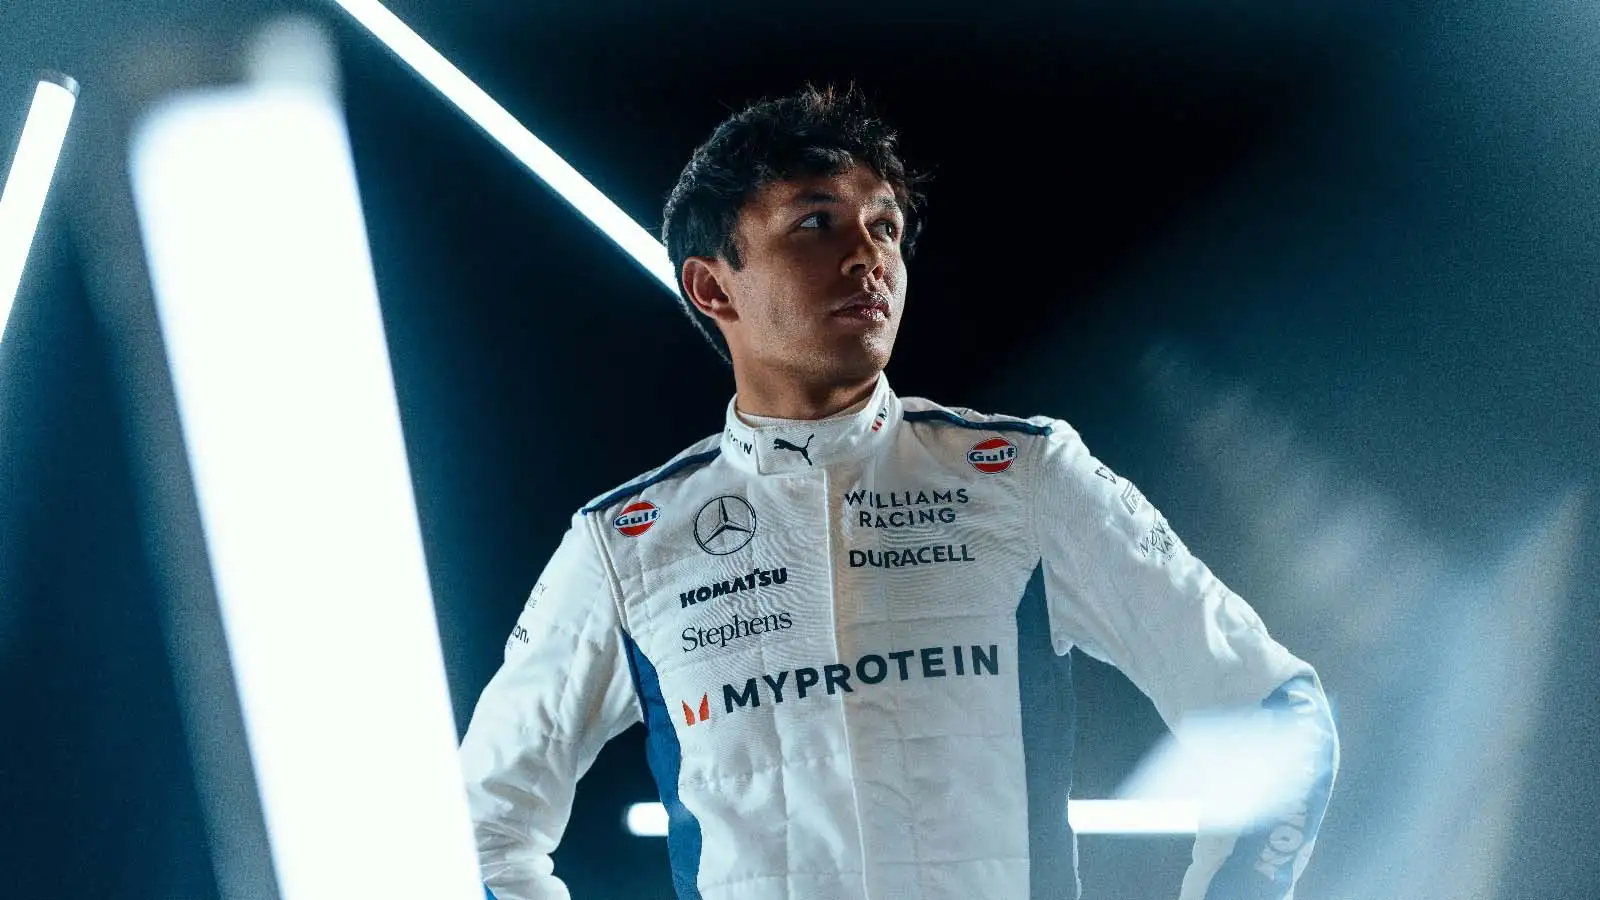 Alex Albon poses in the new Williams race suit.